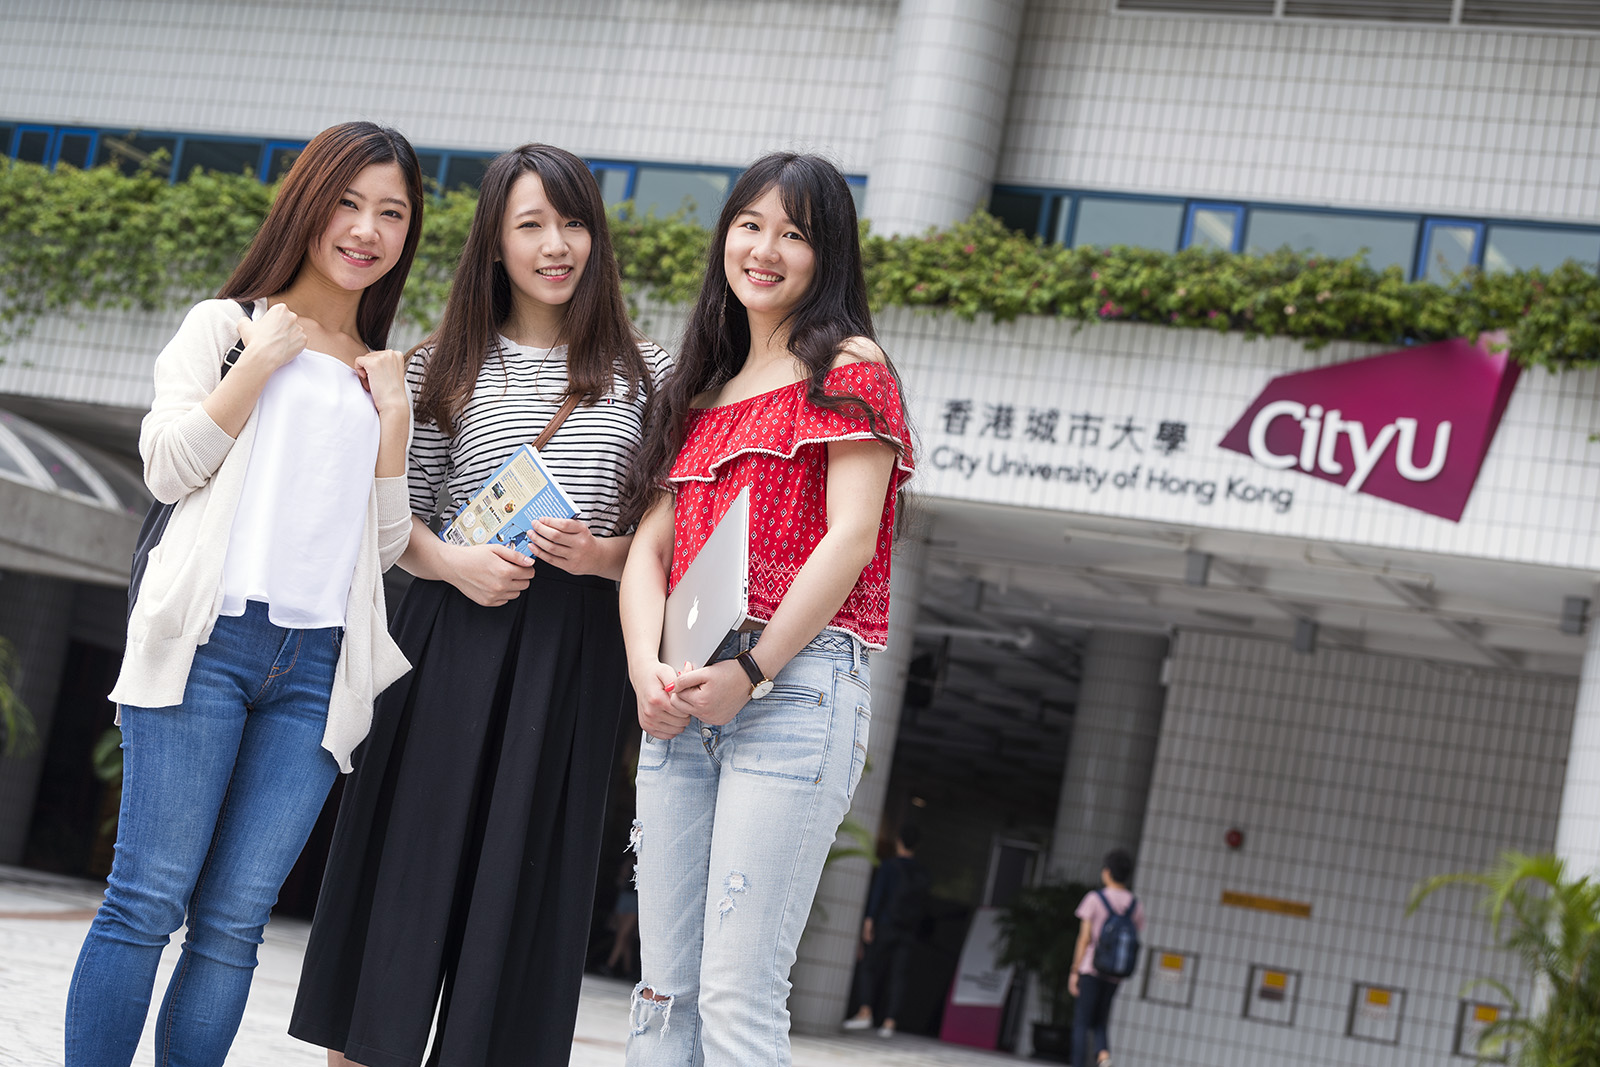 CityU 2020 JUPAS Consultation Week will be held from 25 to 30 May.